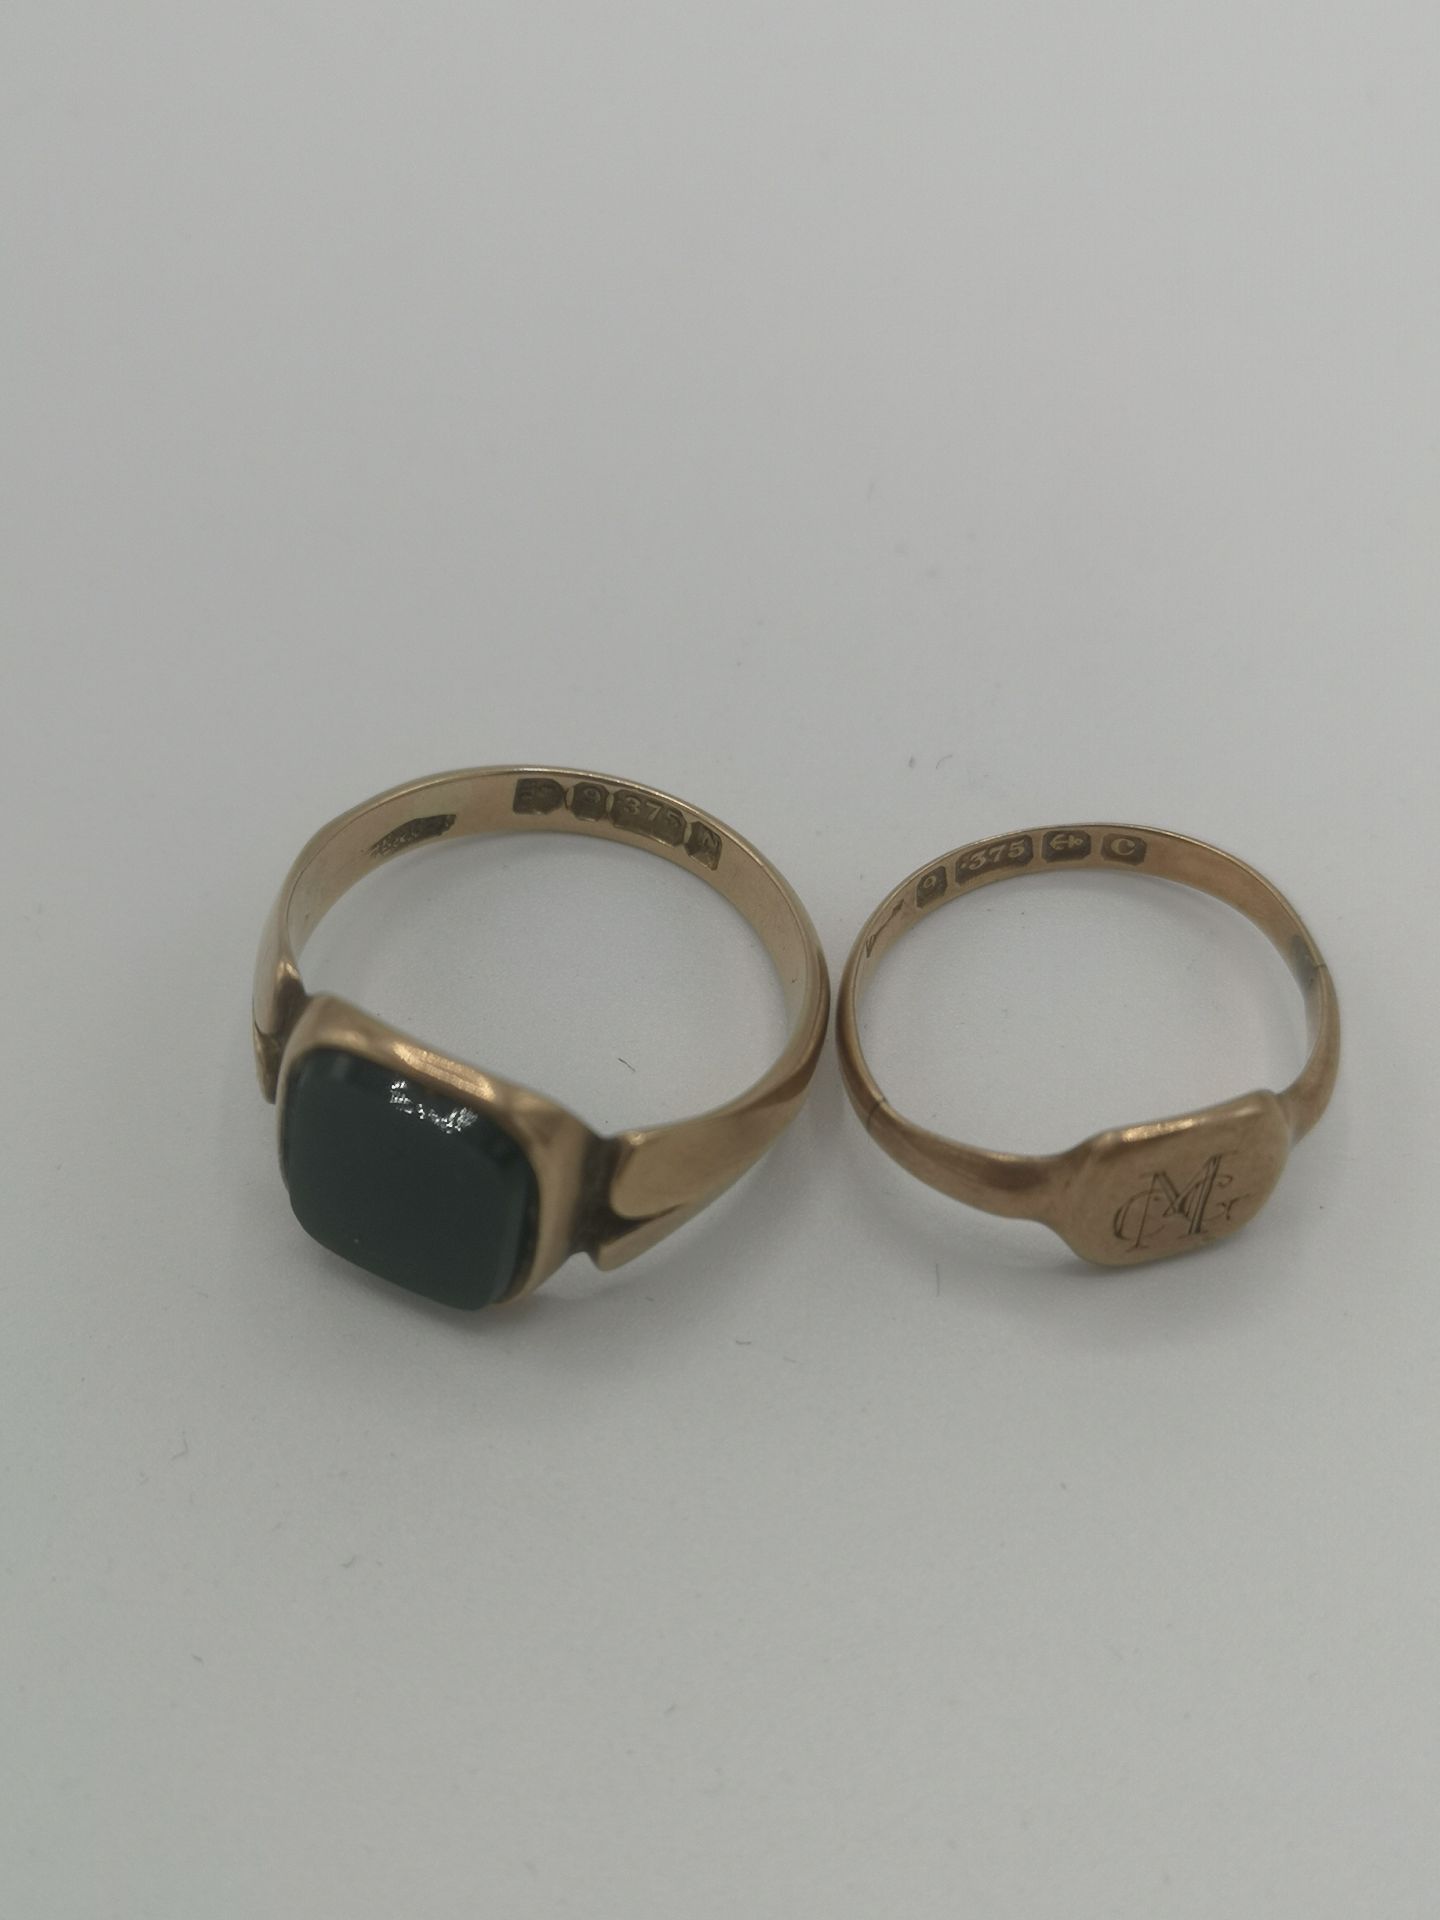 Two 9ct gold signet rings - Image 4 of 4